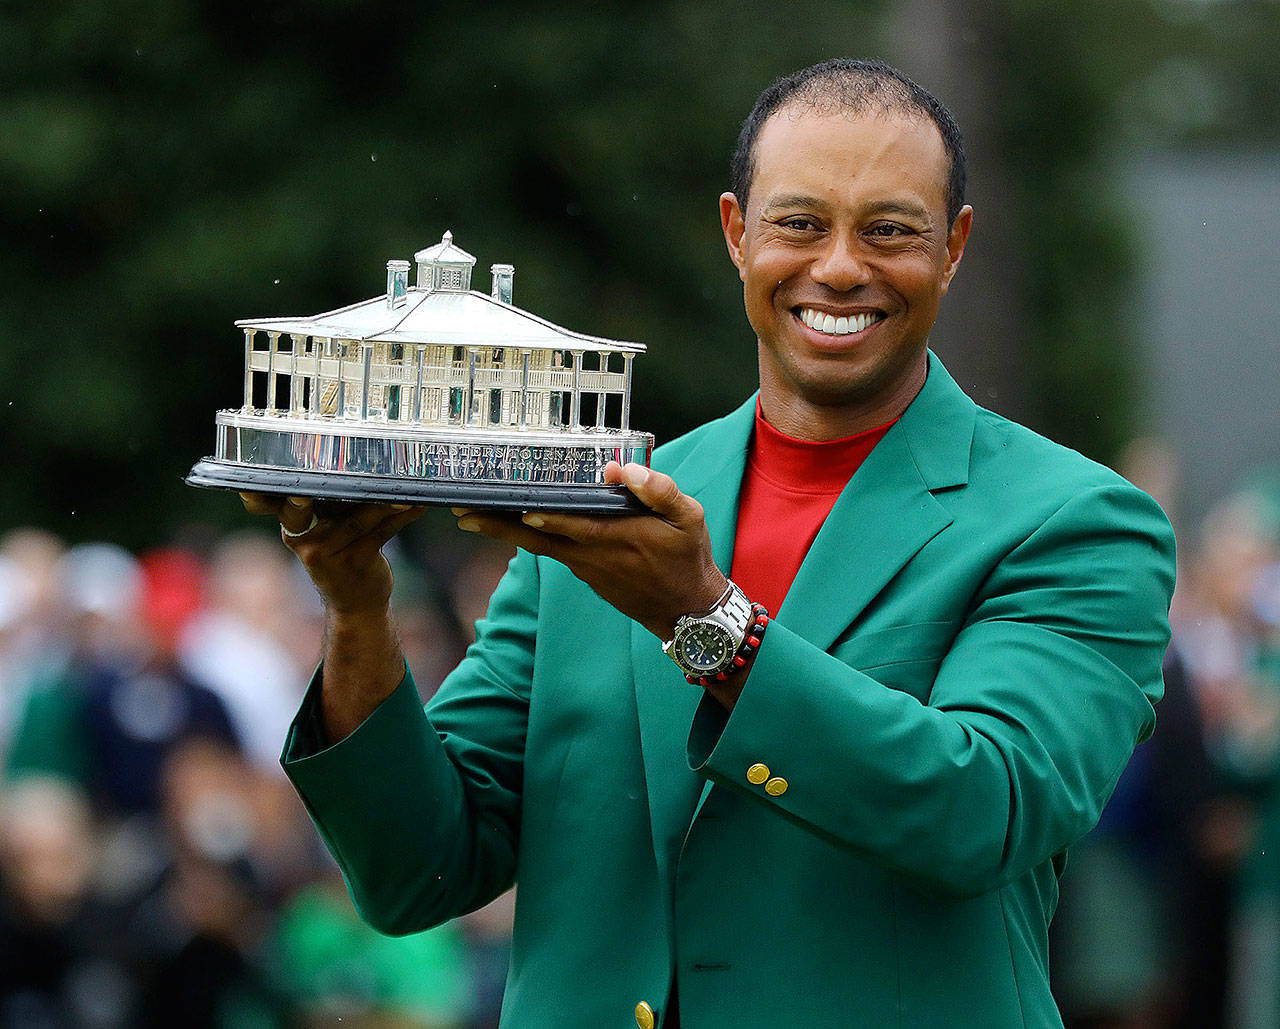 Tiger Woods holds the trophy after being presented the green jacket for winning the Masters at Augusta National Golf Club on Sunday, April 14, 2019, in Augusta, Ga. (Curtis Compton/Atlanta Journal-Constitution/TNS)